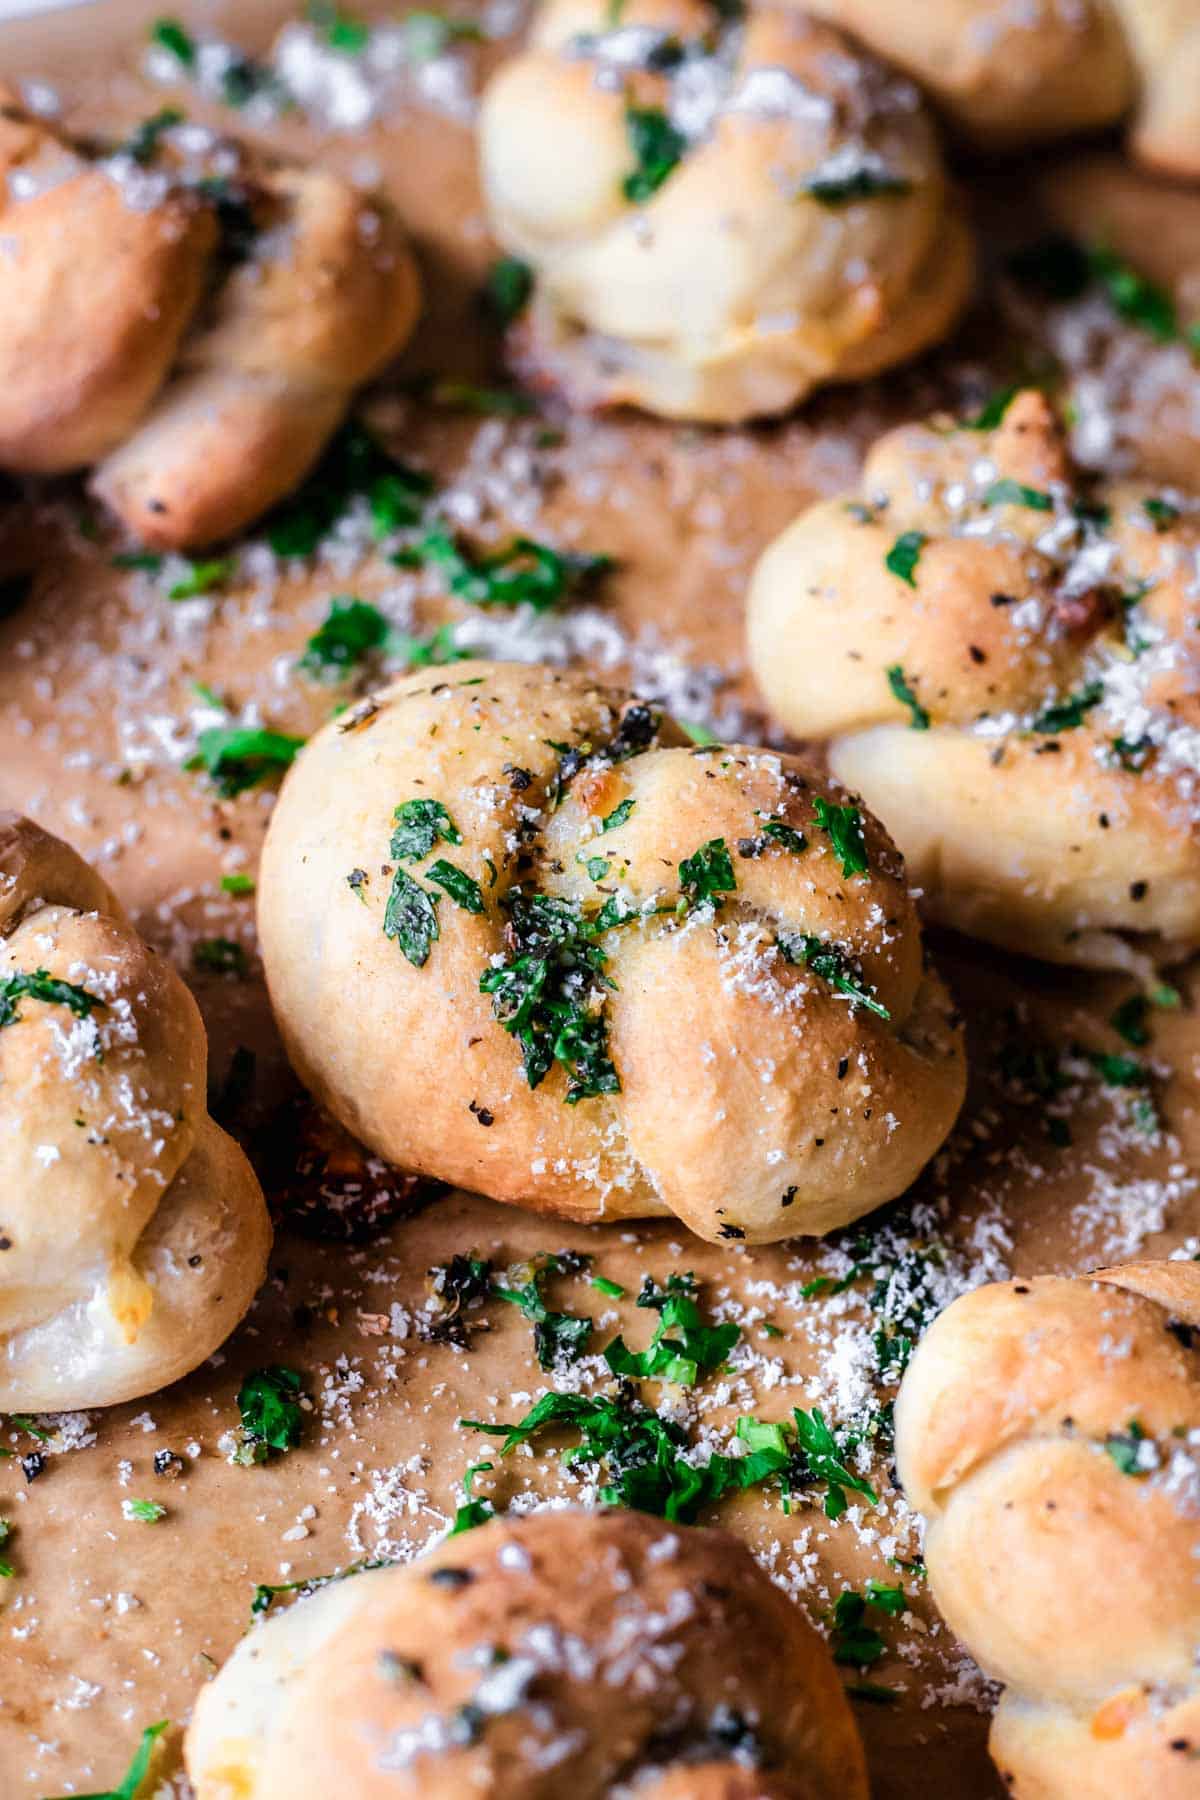 Garlic knots photographed from the side